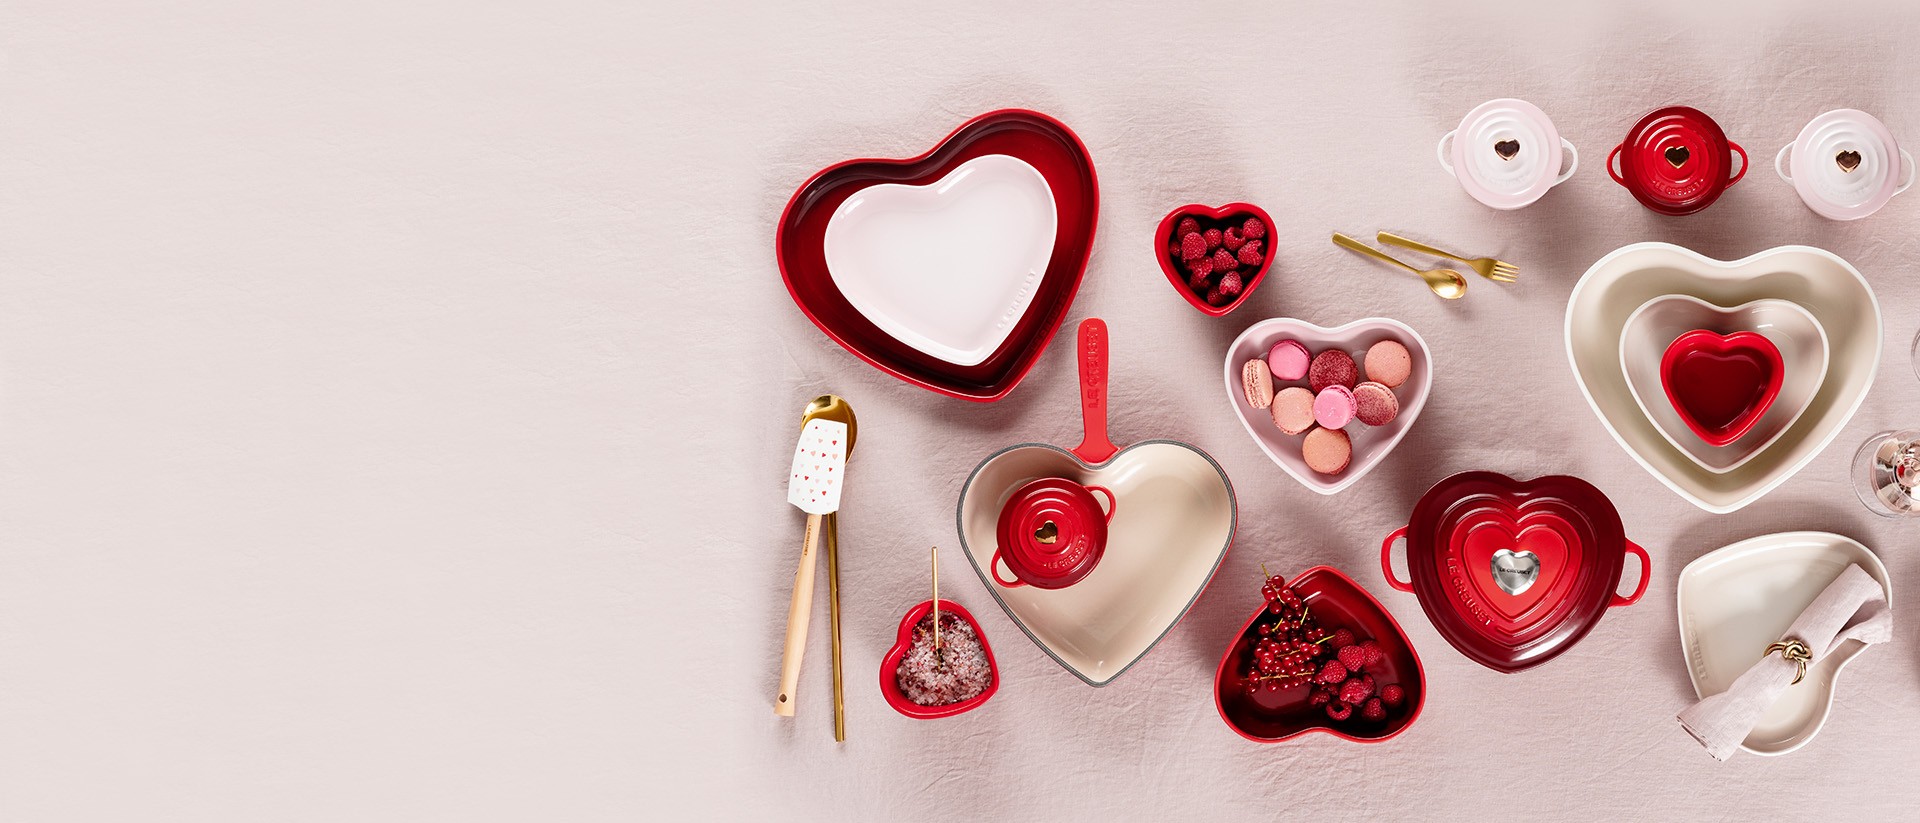 Le Creuset Valentine's Day Collection - Le Creuset Heart-Shaped Products